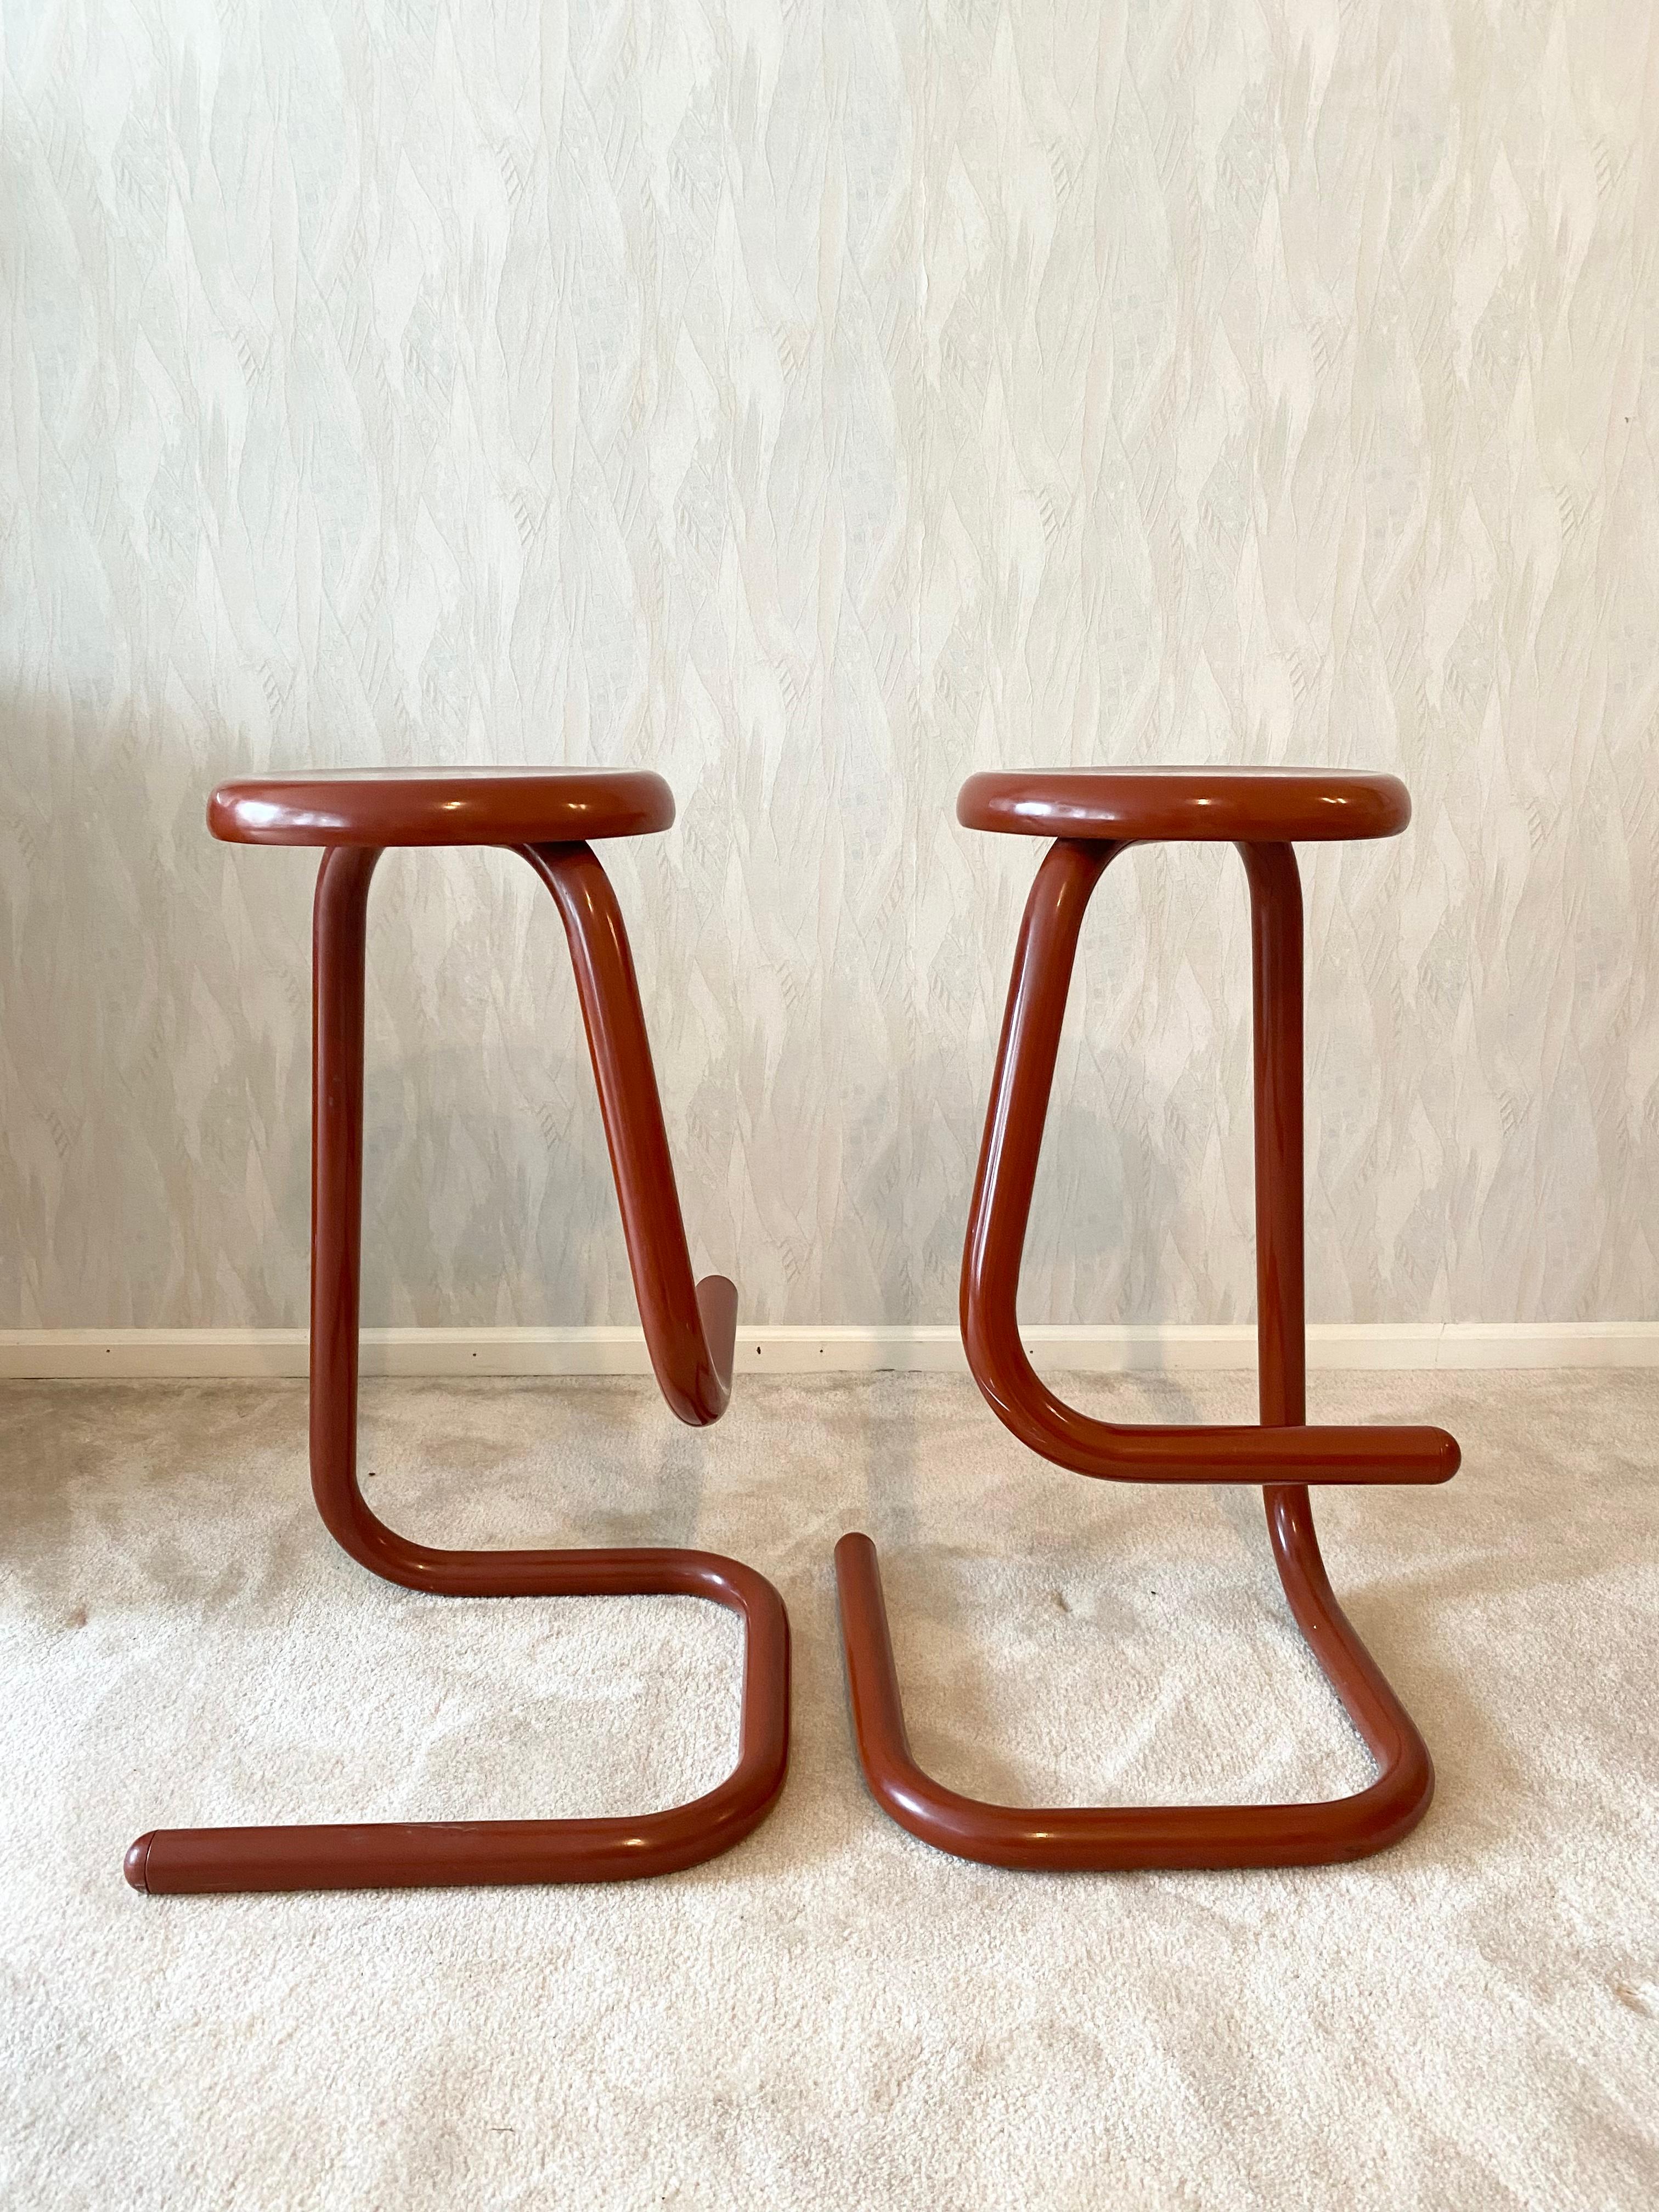 A rare set of shiny red k700 Paperclip stools by Kinetics, Canada. This pair had one owner for 37 years, and has been carefully looked after. The Paperclip stool is one of those ideal pieces of design, one singular line creates the structure. The